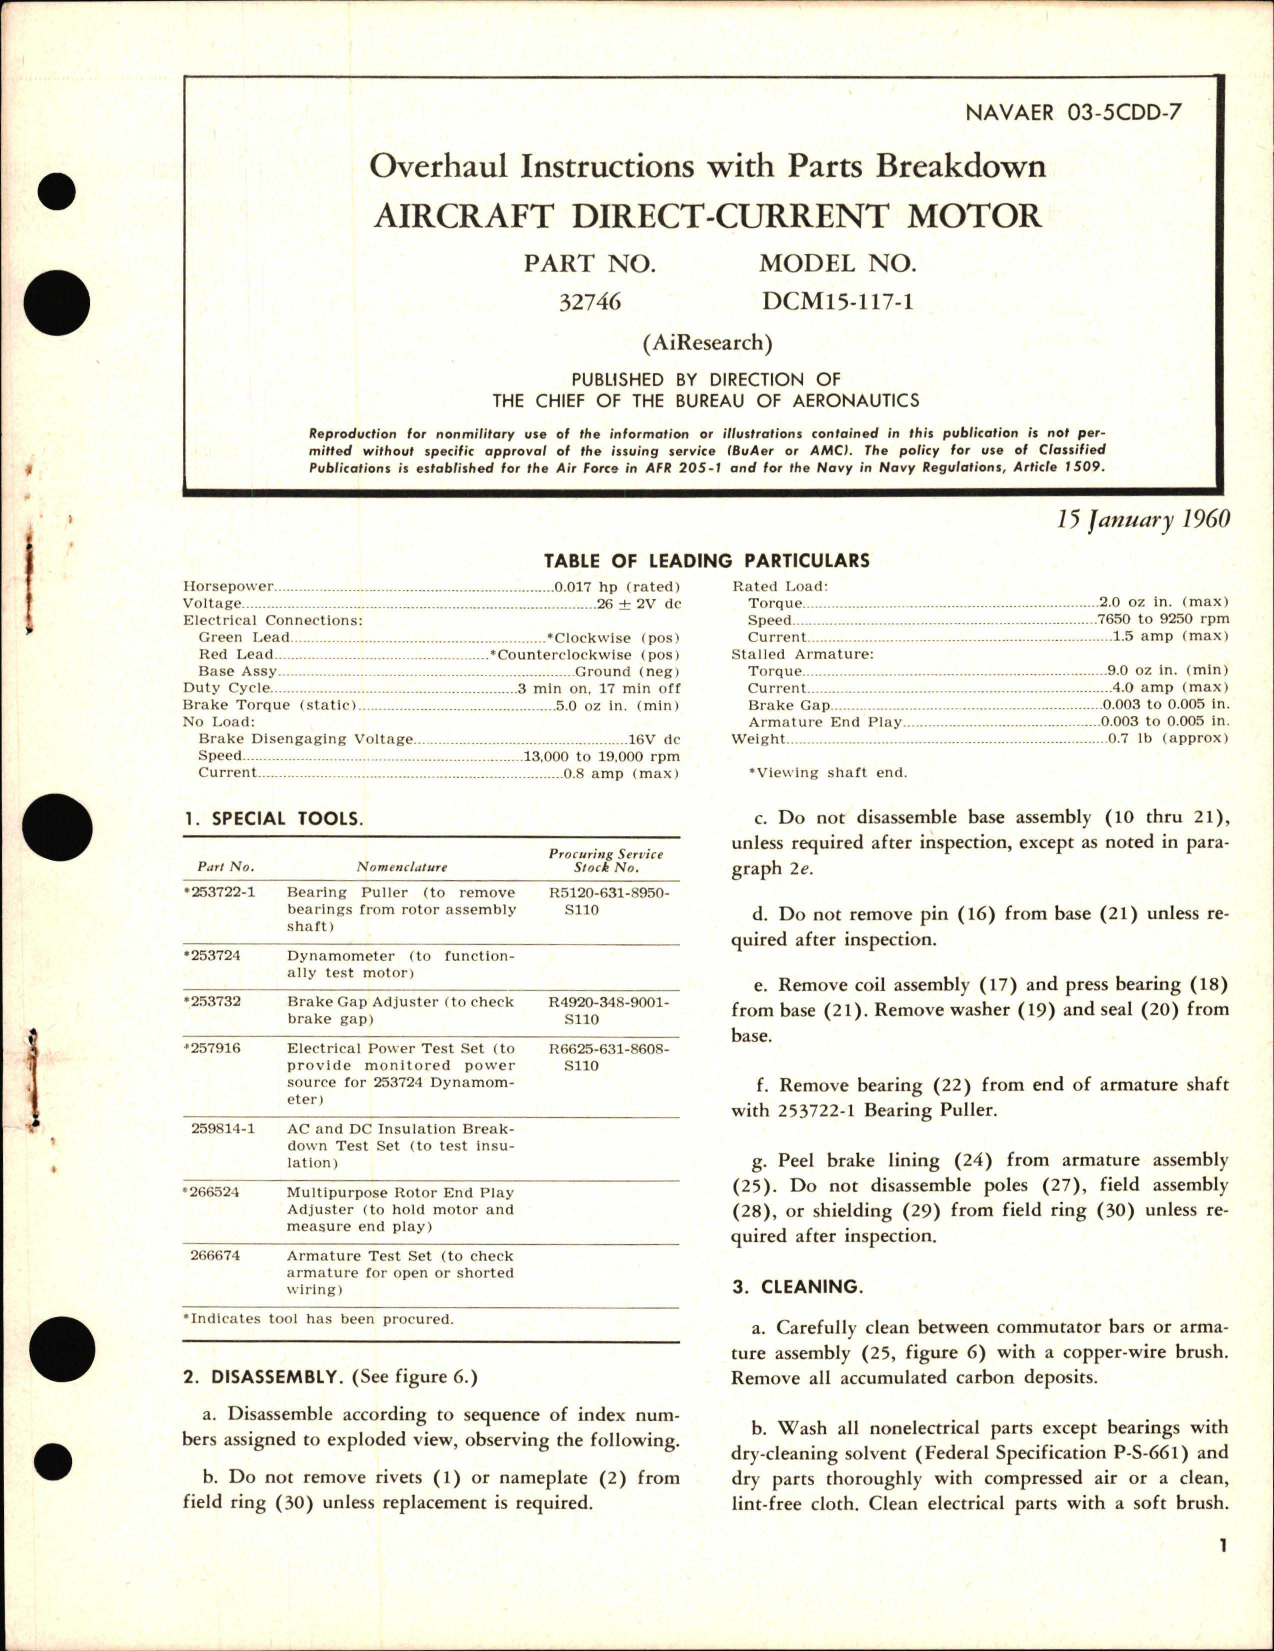 Sample page 1 from AirCorps Library document: Overhaul Instructions with Parts Breakdown for Aircraft Direct-Current Motor - Part 32746 Model DCM15-117-1